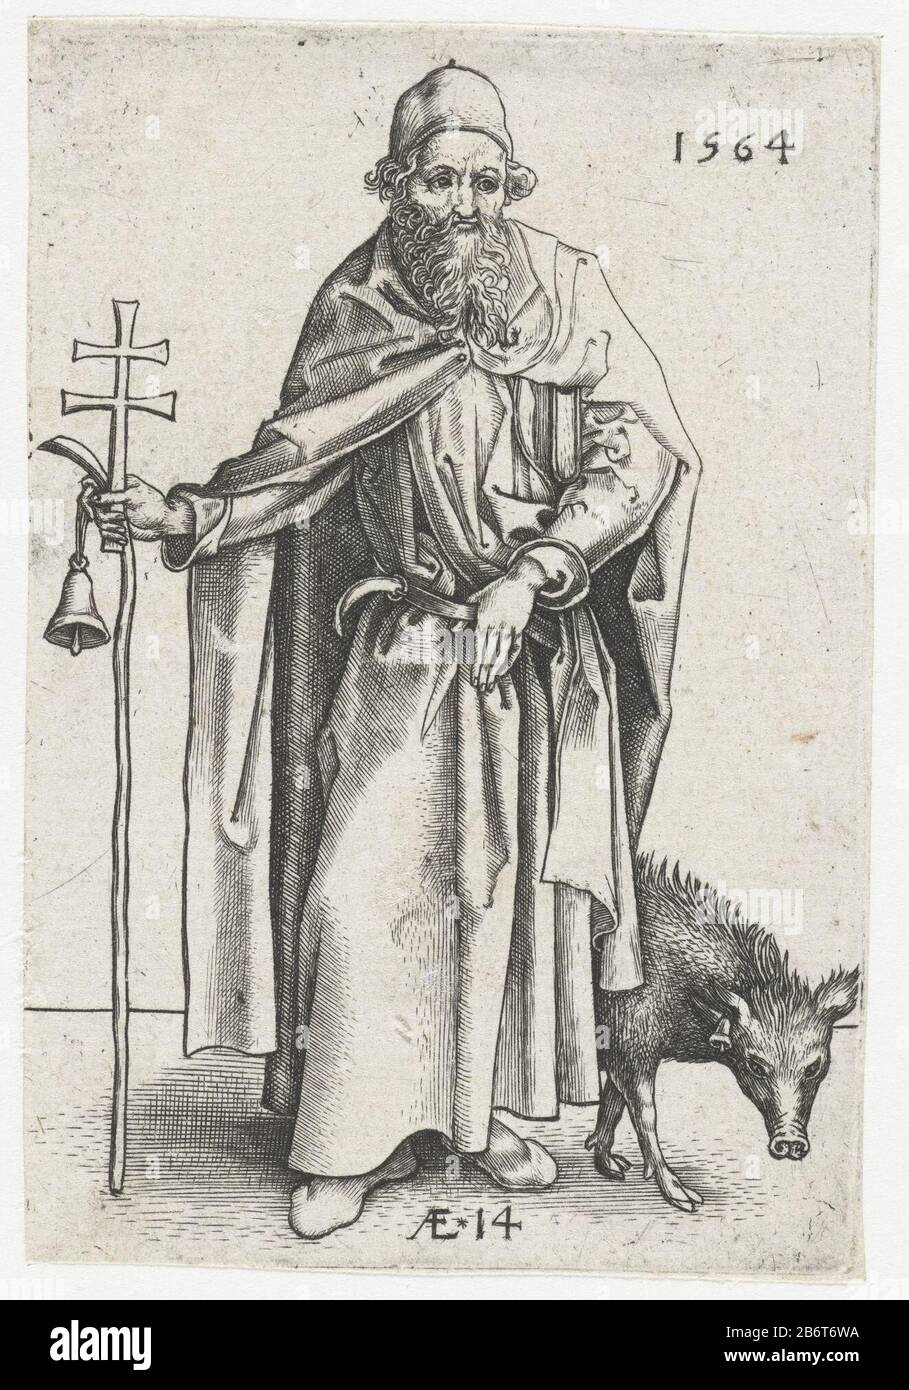 Heilige Antonius Saint Anthony with a staff , a cross and a bell in hand and a pig at his feet. At the bottom of the presentation is 'AE * 14'. Manufacturer : to print by Martin Schongauerprentmaker: Jerome Who: rixPlaats manufacture: Antwerp Date: 1564 Physical features: car material: paper Technique: engra (printing process) Dimensions: sheet: H 89 mm × W 60 mmToelichtingKopie in mirror image to a print of Schongauer. Klinkert, C. Subject: the hermit Antony Abbot (Antonius Abbas) of Egypt, also called the Great; possible attributes: bell, book, T-shaped staff, flames, pig Stock Photo